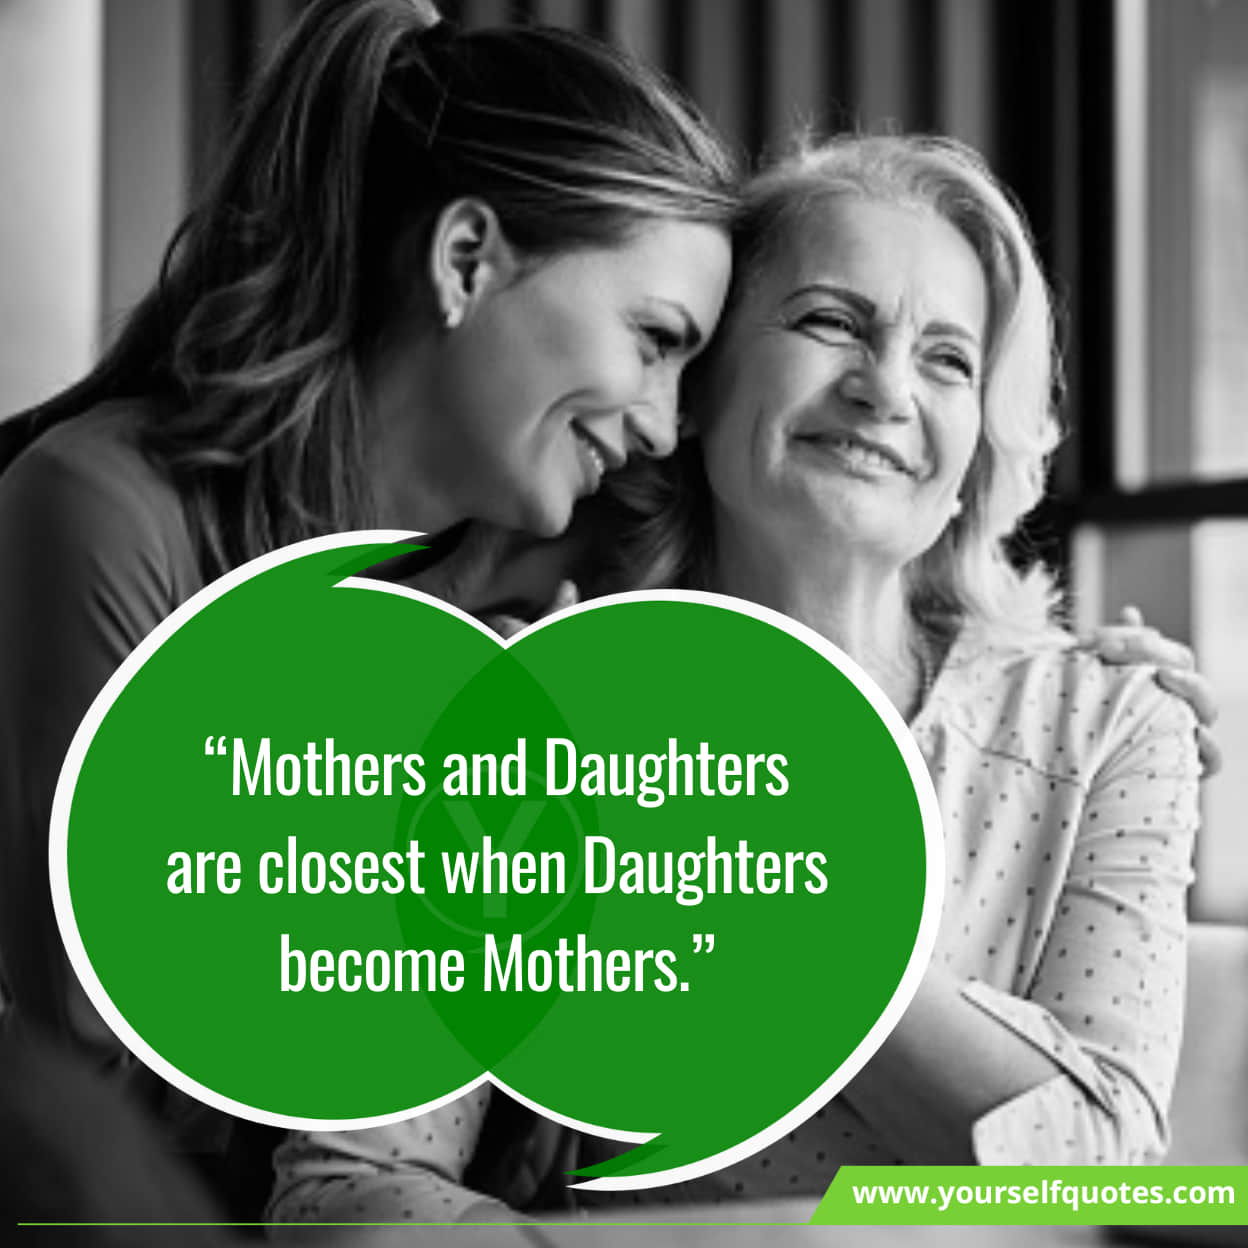 Inspirational Quotes On Mother-Daughter